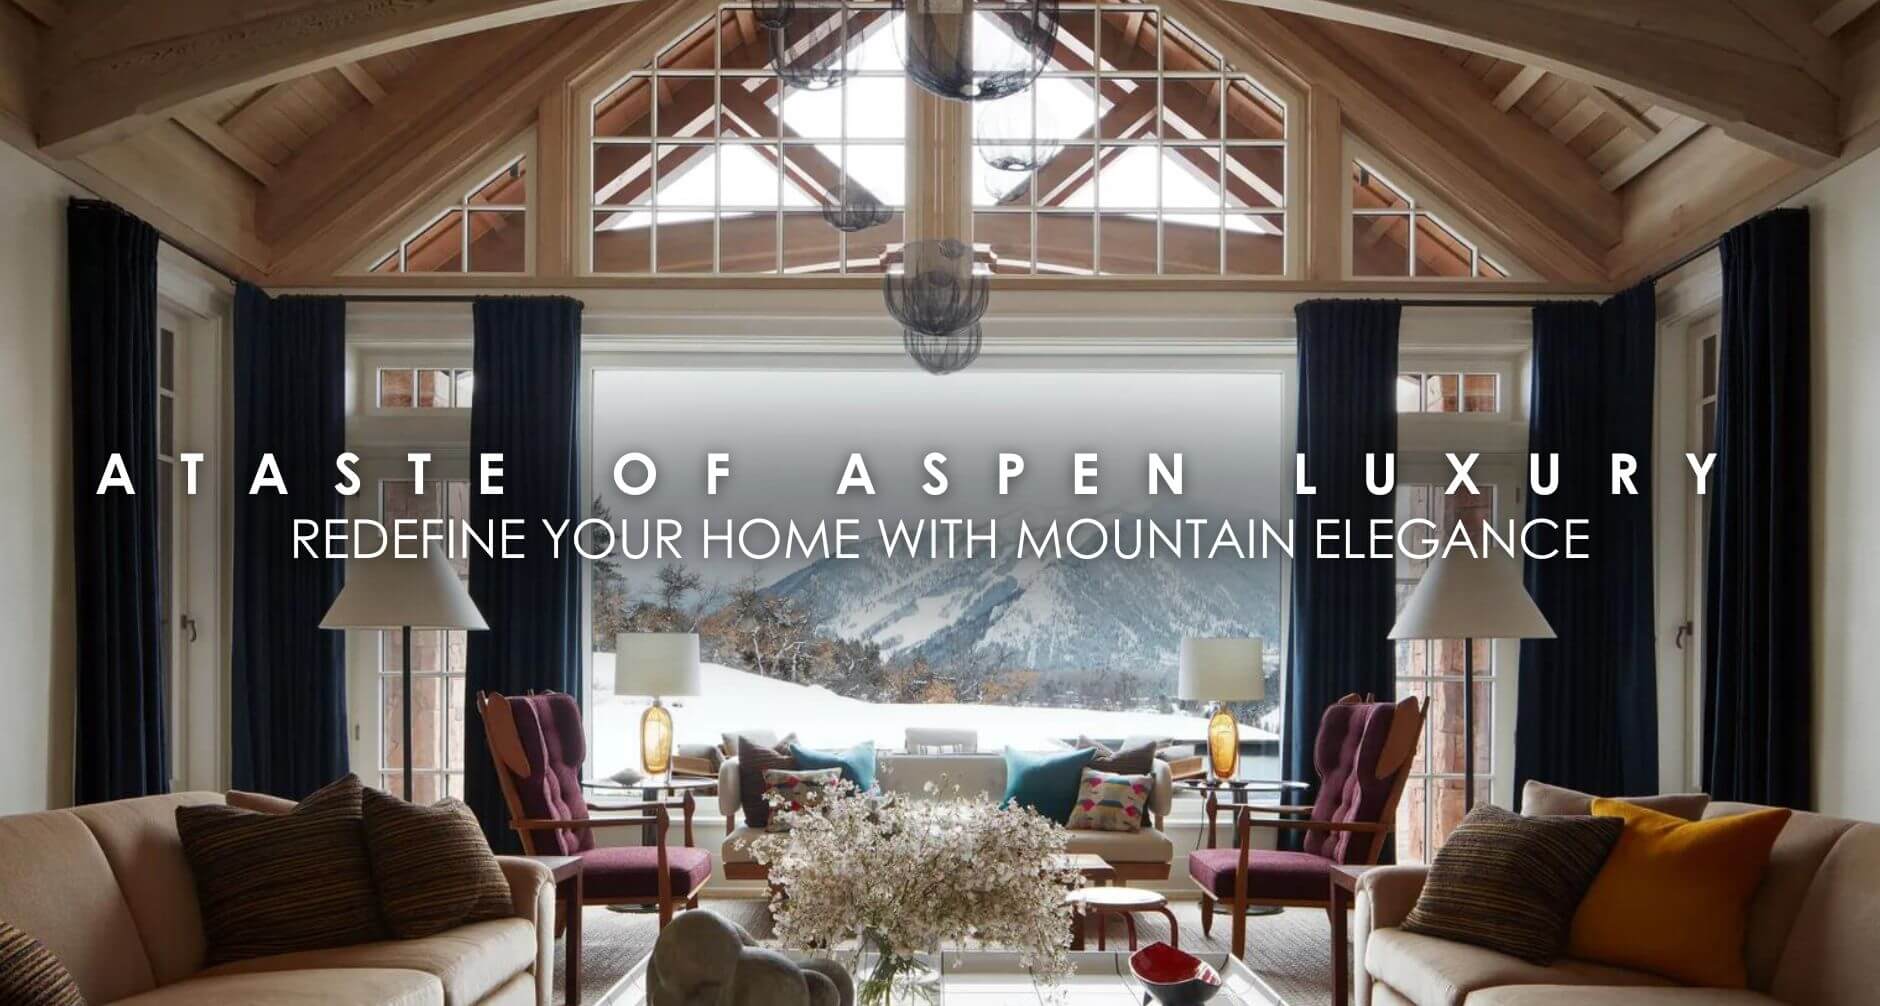 Experience Aspen luxury at home with curated elegance by LuxeDecor. Transform your space with premier brands and embrace mountain chic.